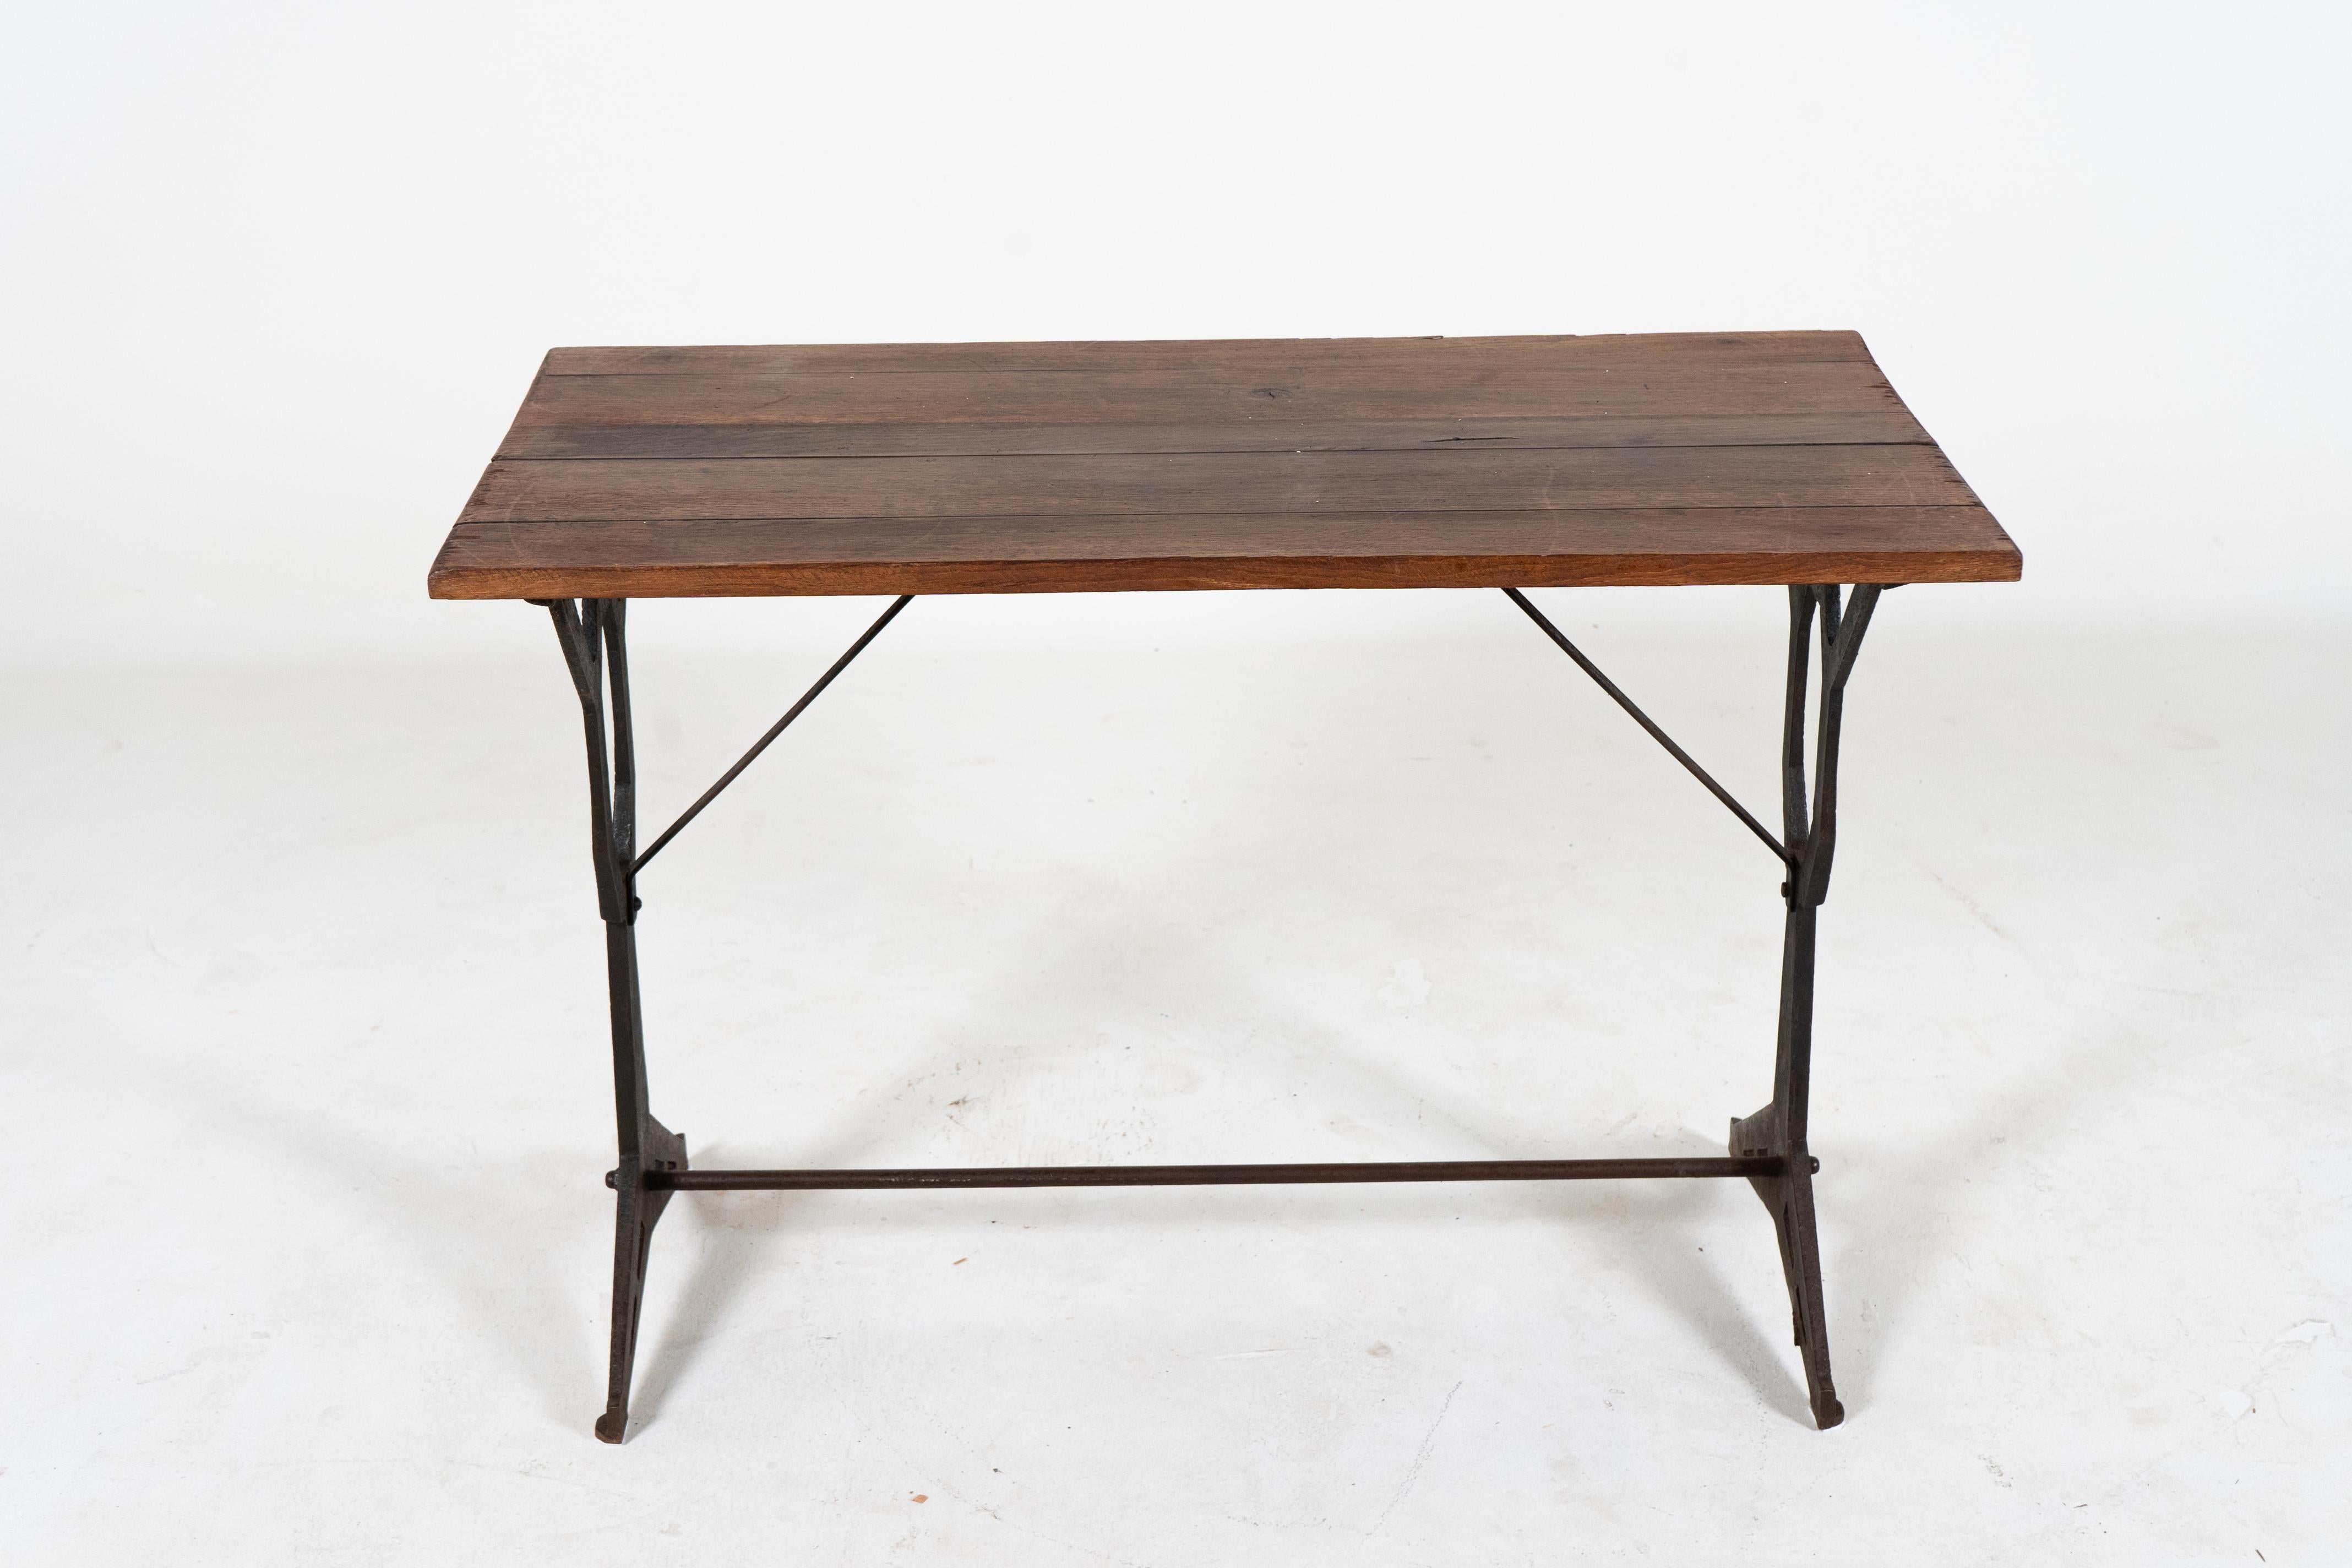 A charming vintage French bistro table from Paris with a thick rectangular slated oak wood top. This table has detailed cast iron legs with an x-shaped brace between the legs for support. The design of the legs is cubist -quite angular and unusual.